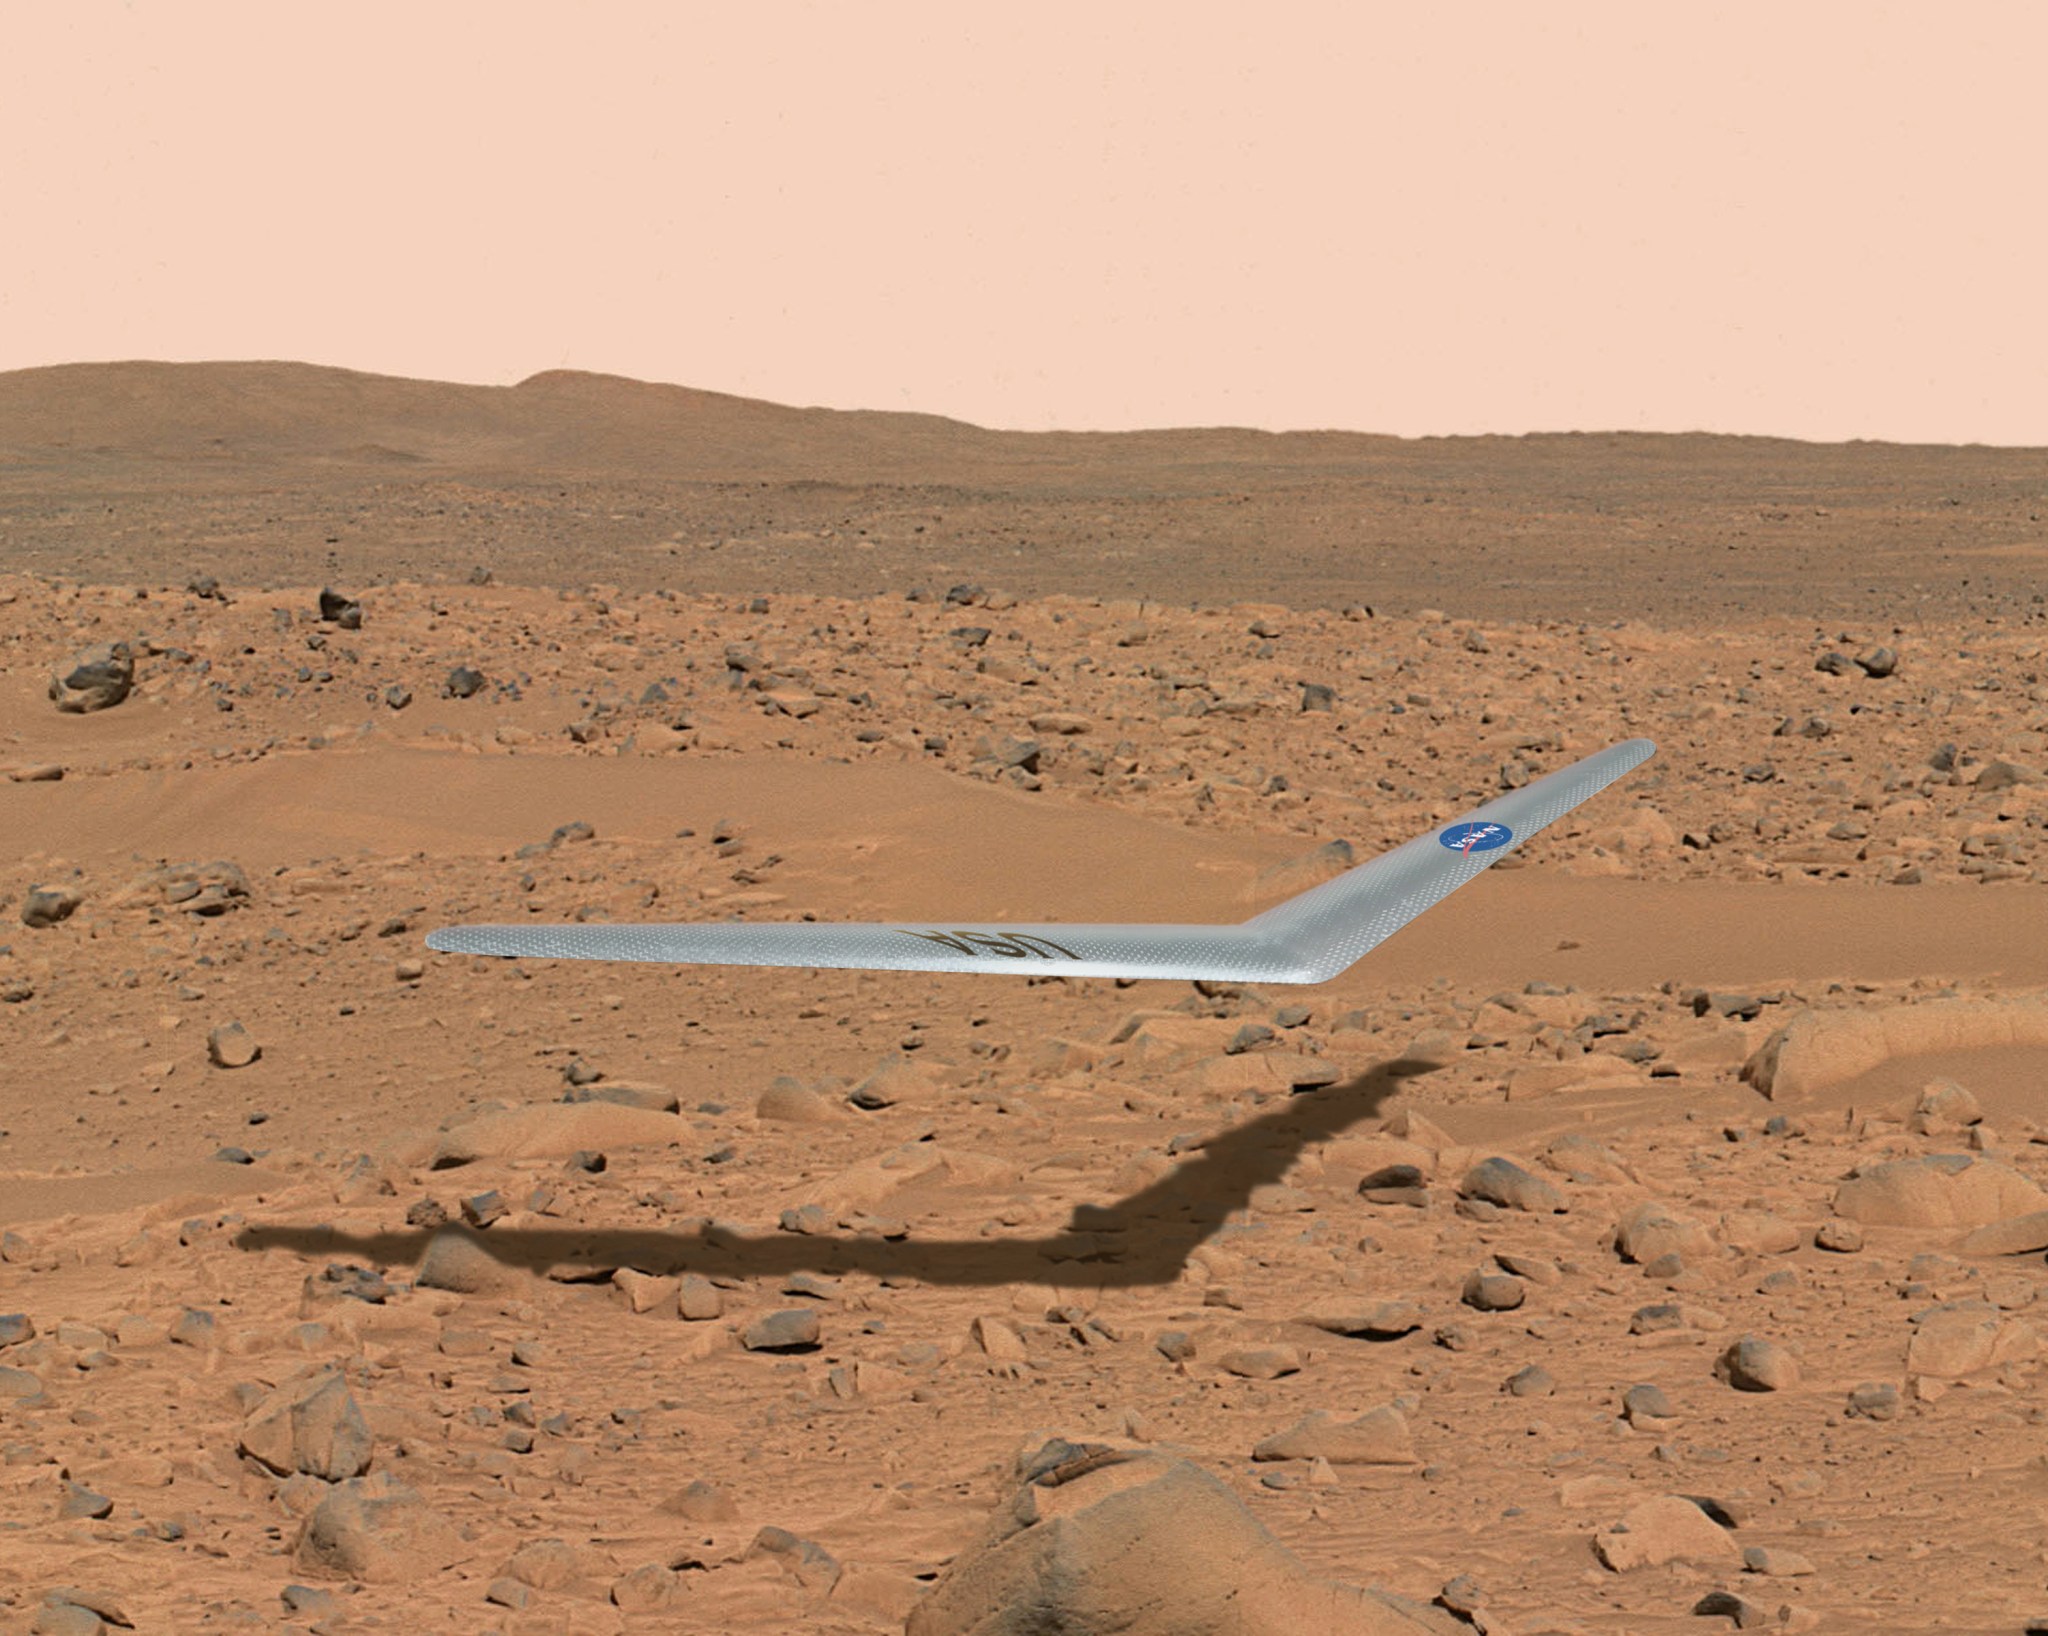 This illustration shows what a Prandtl-m might look like flying above the surface of Mars.